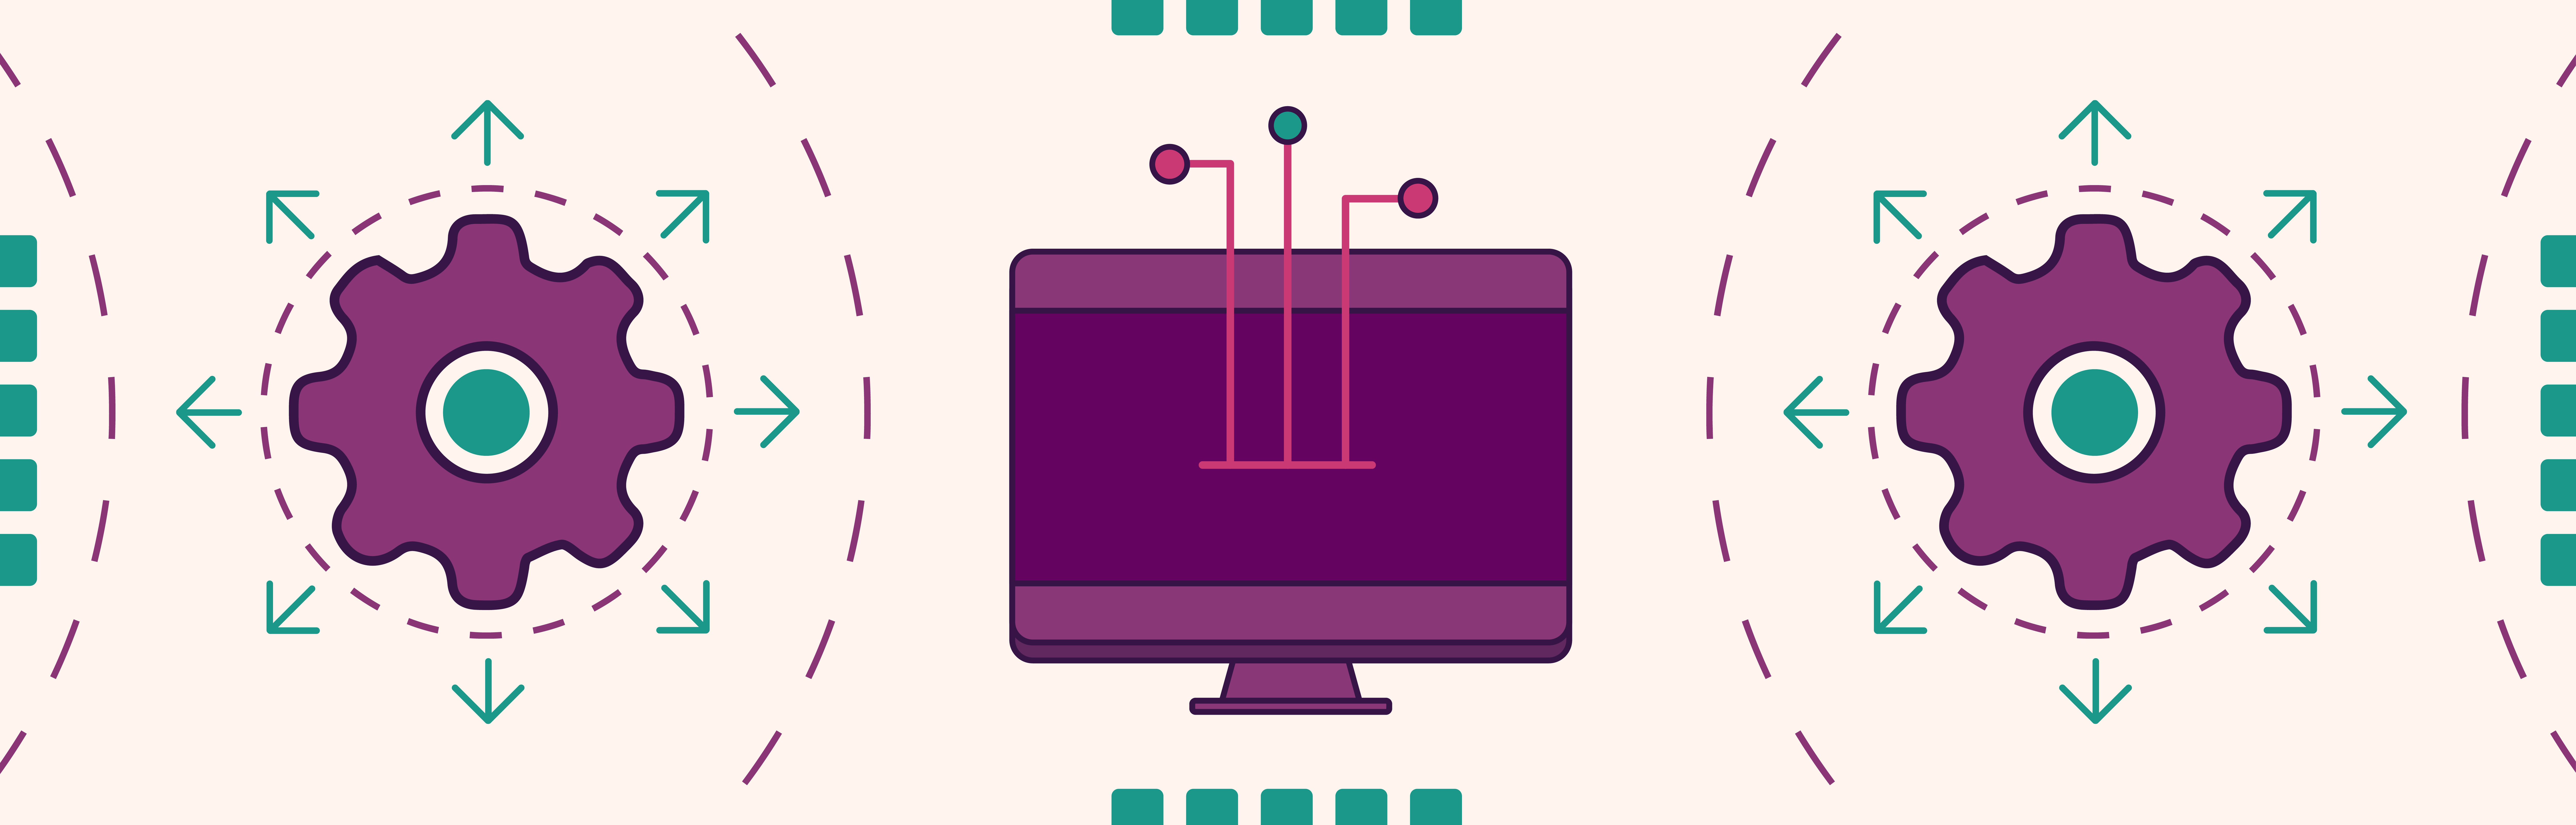 Illustration: On a light pink background, a dark purple computer monitor has pink lines coming up off the screen ending in pink and mint green dots. Two large purple gears sit on either side of the monitor outlined by dark purple dashed circles and mint green arrows pointing away from the gears - all to visualize the innovation and collaboration of Ally's annual hackathon.